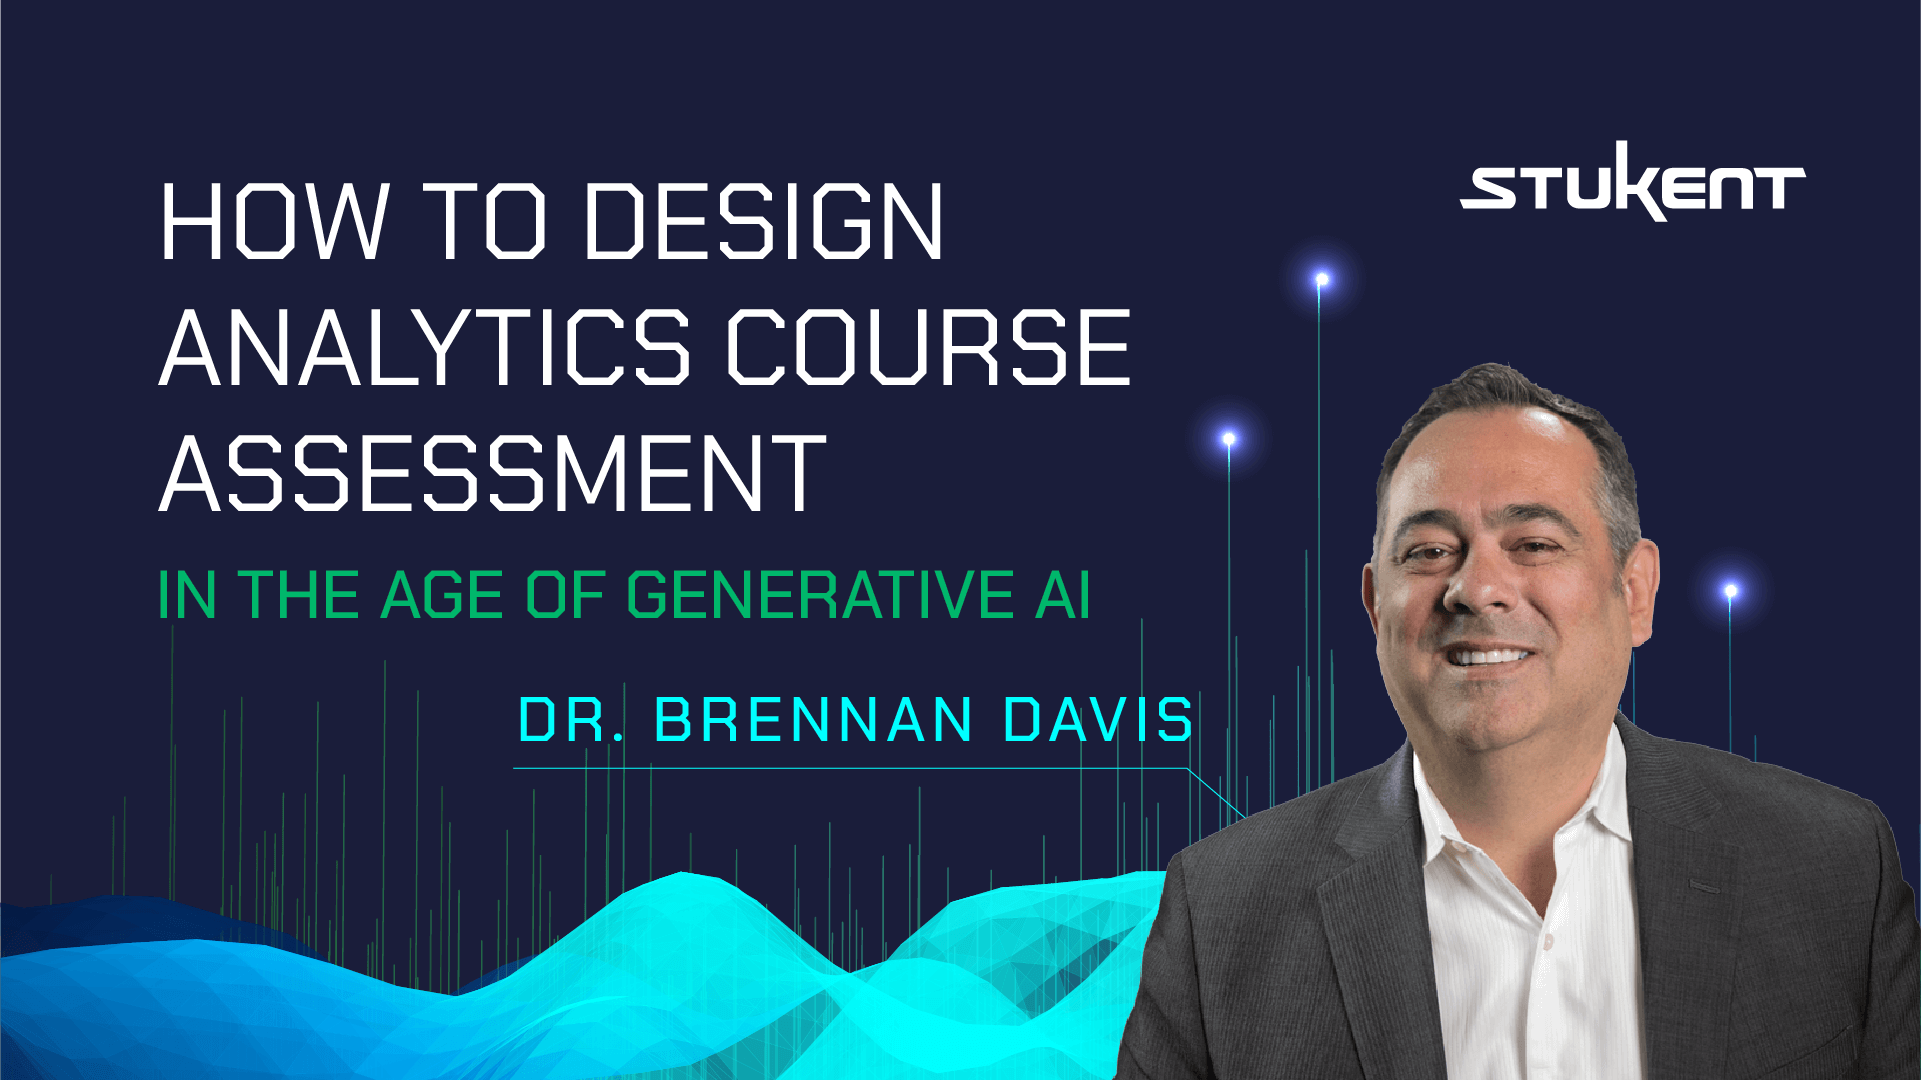 How to Design an Analytics Course Assessment in the Age of Generative AI [Video]